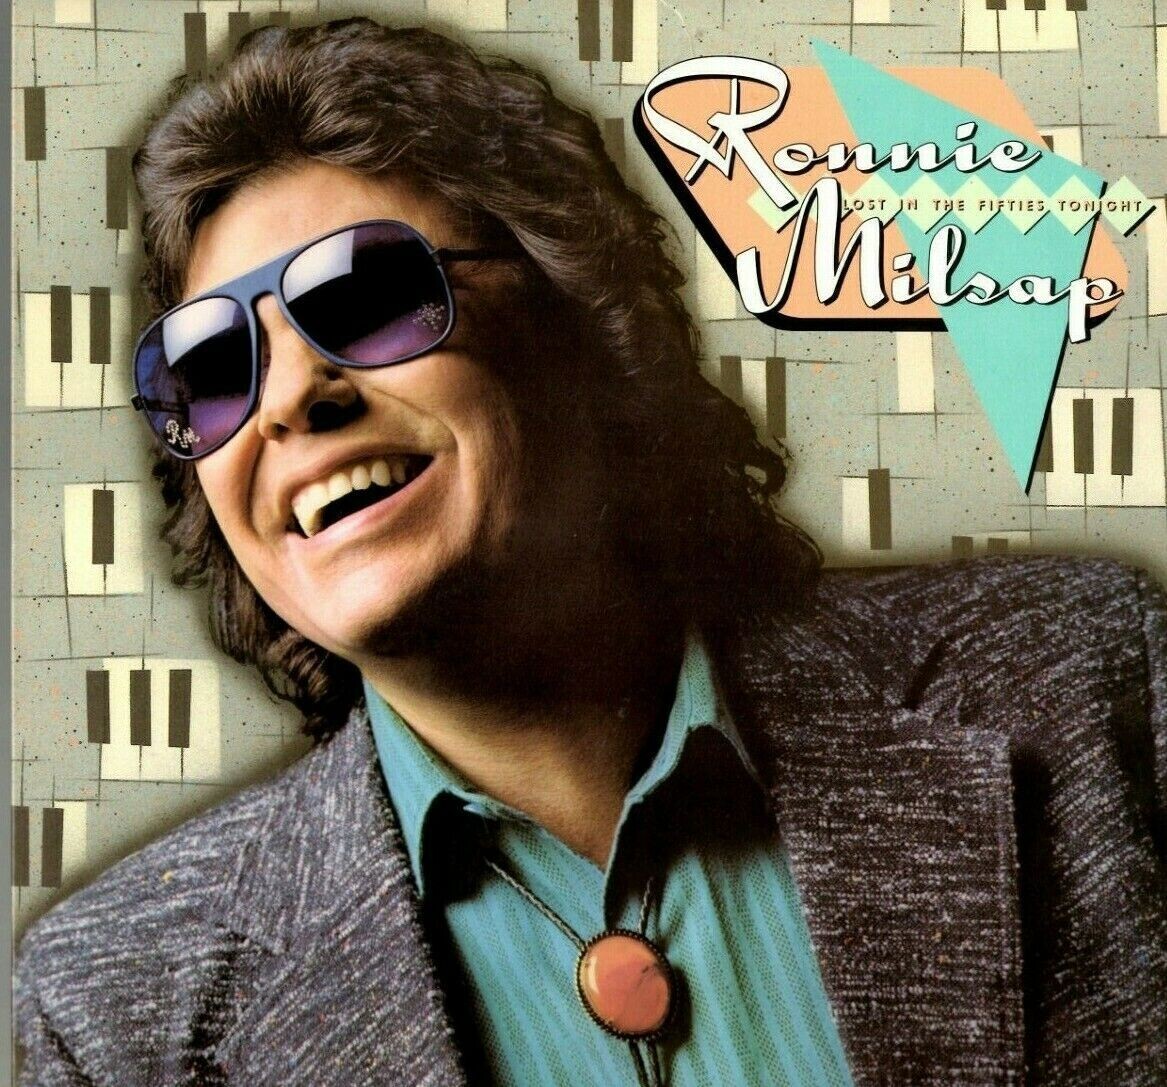 Ronnie Milsap "Lost In The Fifties Tonight" NM- 1986